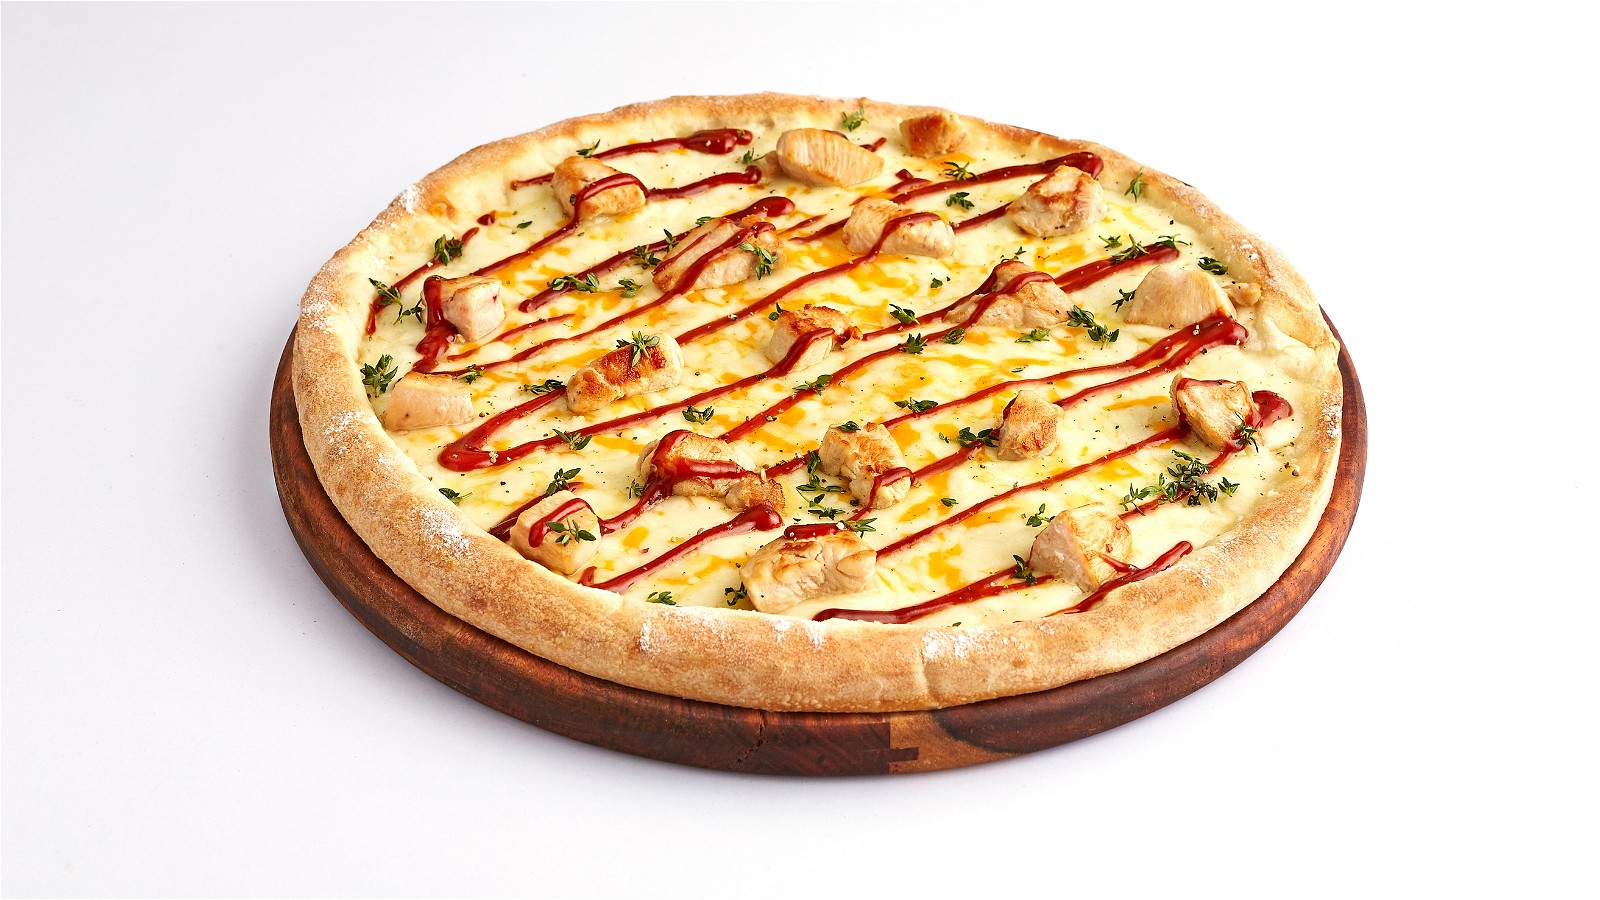 Image of Loaded Thanksgiving Pizza